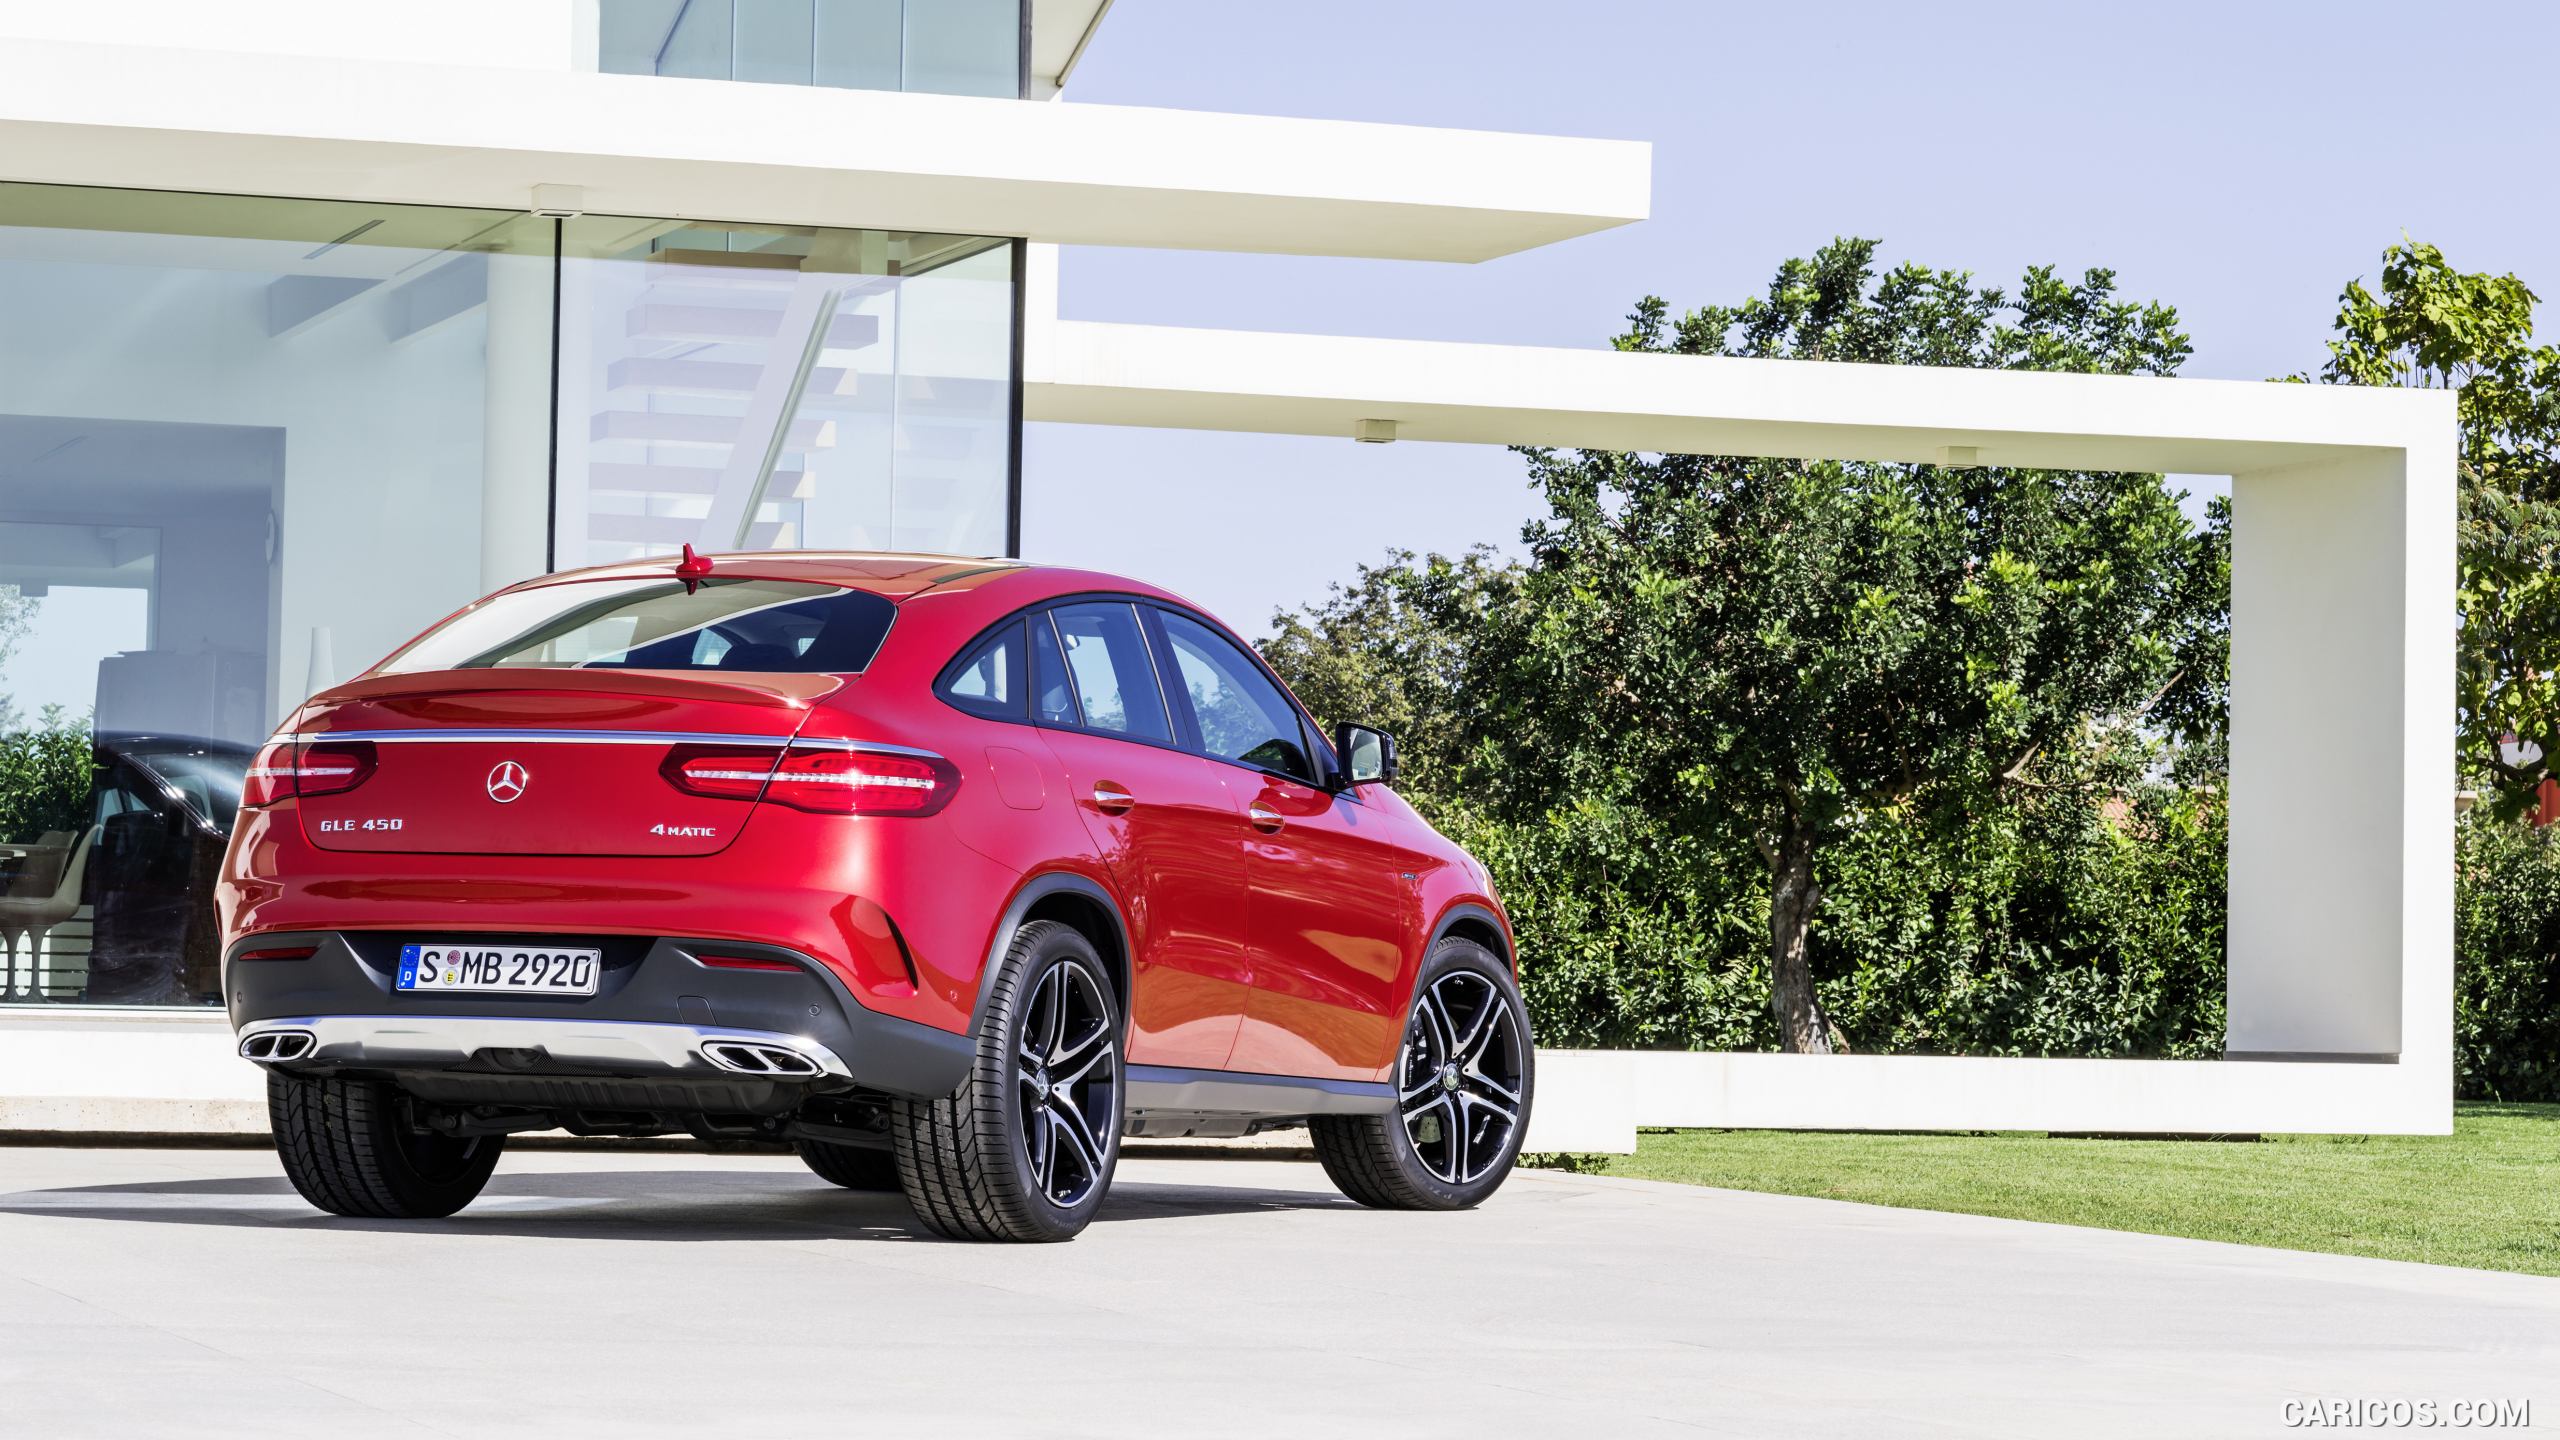 2016 Mercedes-Benz GLE 450 AMG Coupe 4MATIC (Designo Hyacinth Red Metallic) - Rear, #2 of 115